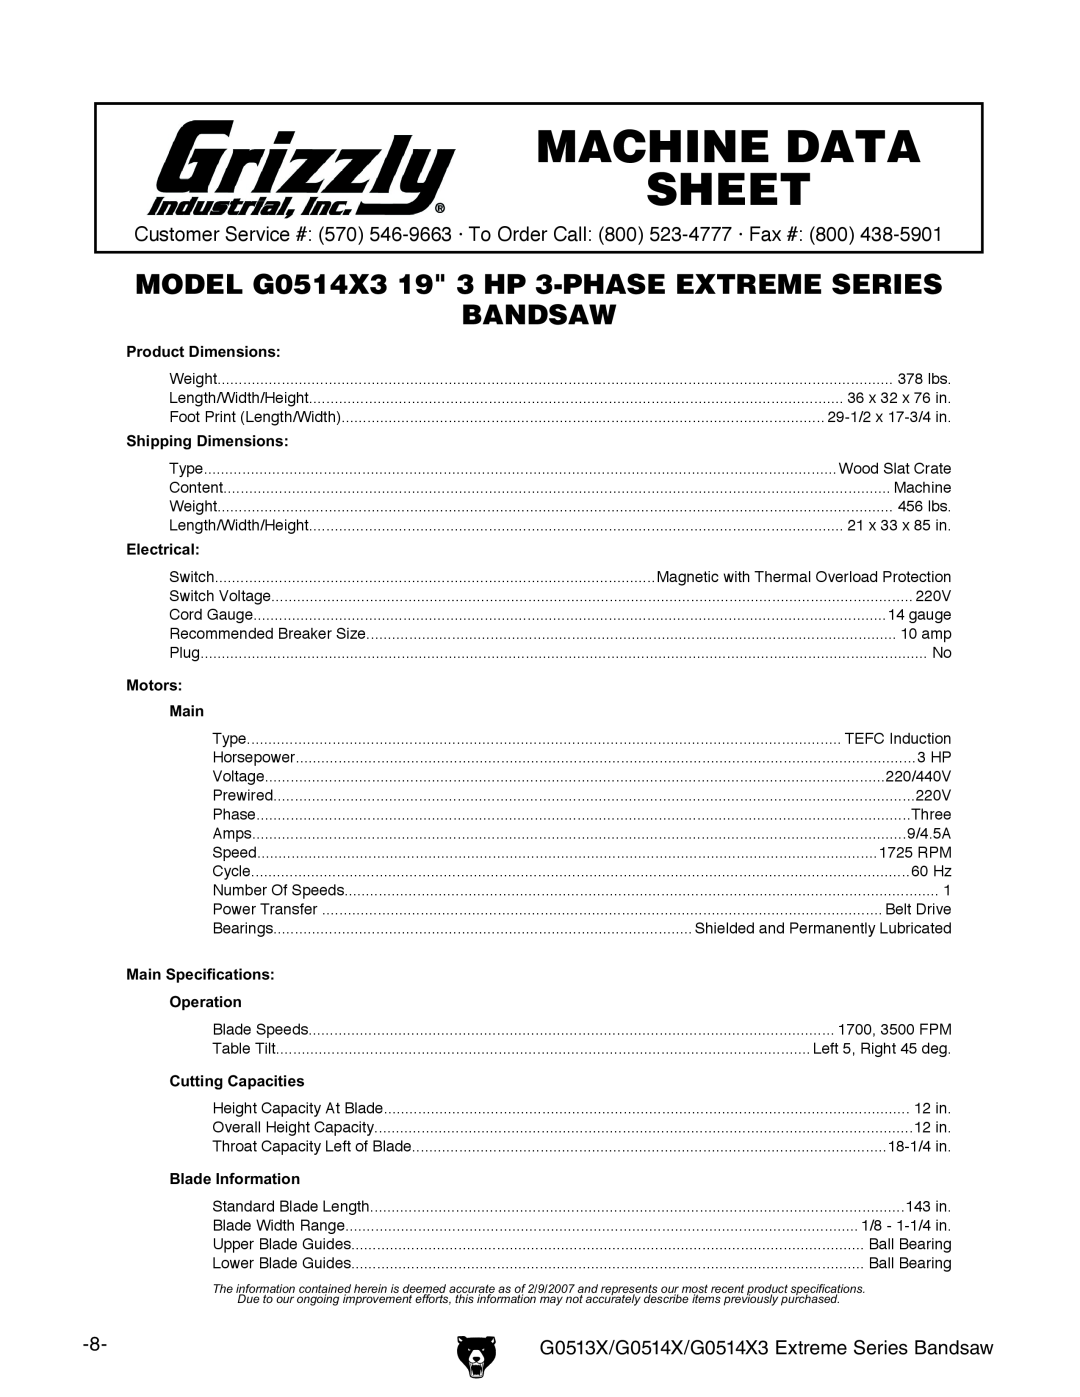 Grizzly G0513X G0514X3 Machine Data Sheet, MODEL G0514X3 19 3 HP 3-PHASE EXTREME SERIES BANDSAW, Product Dimensions, Main 